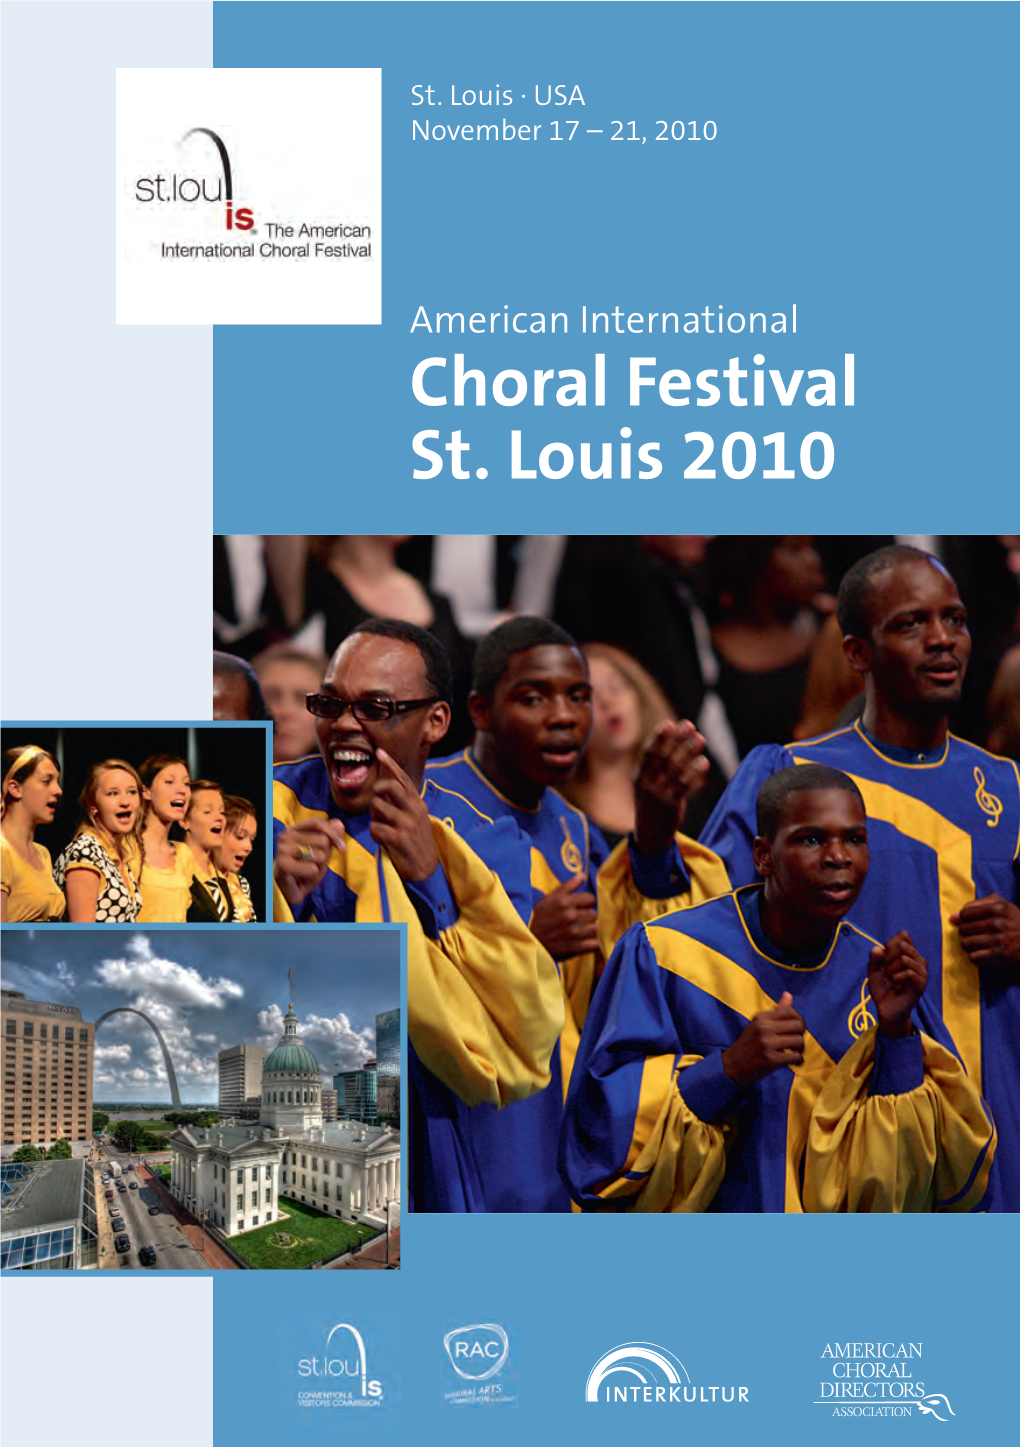 Choral Festival St. Louis 2010 EVENTS 2010 – 2011 for More Than 20 Years MUSICA MUNDI® Is the Exclusive Quality Seal for All INTERKULTUR Events Worldwide